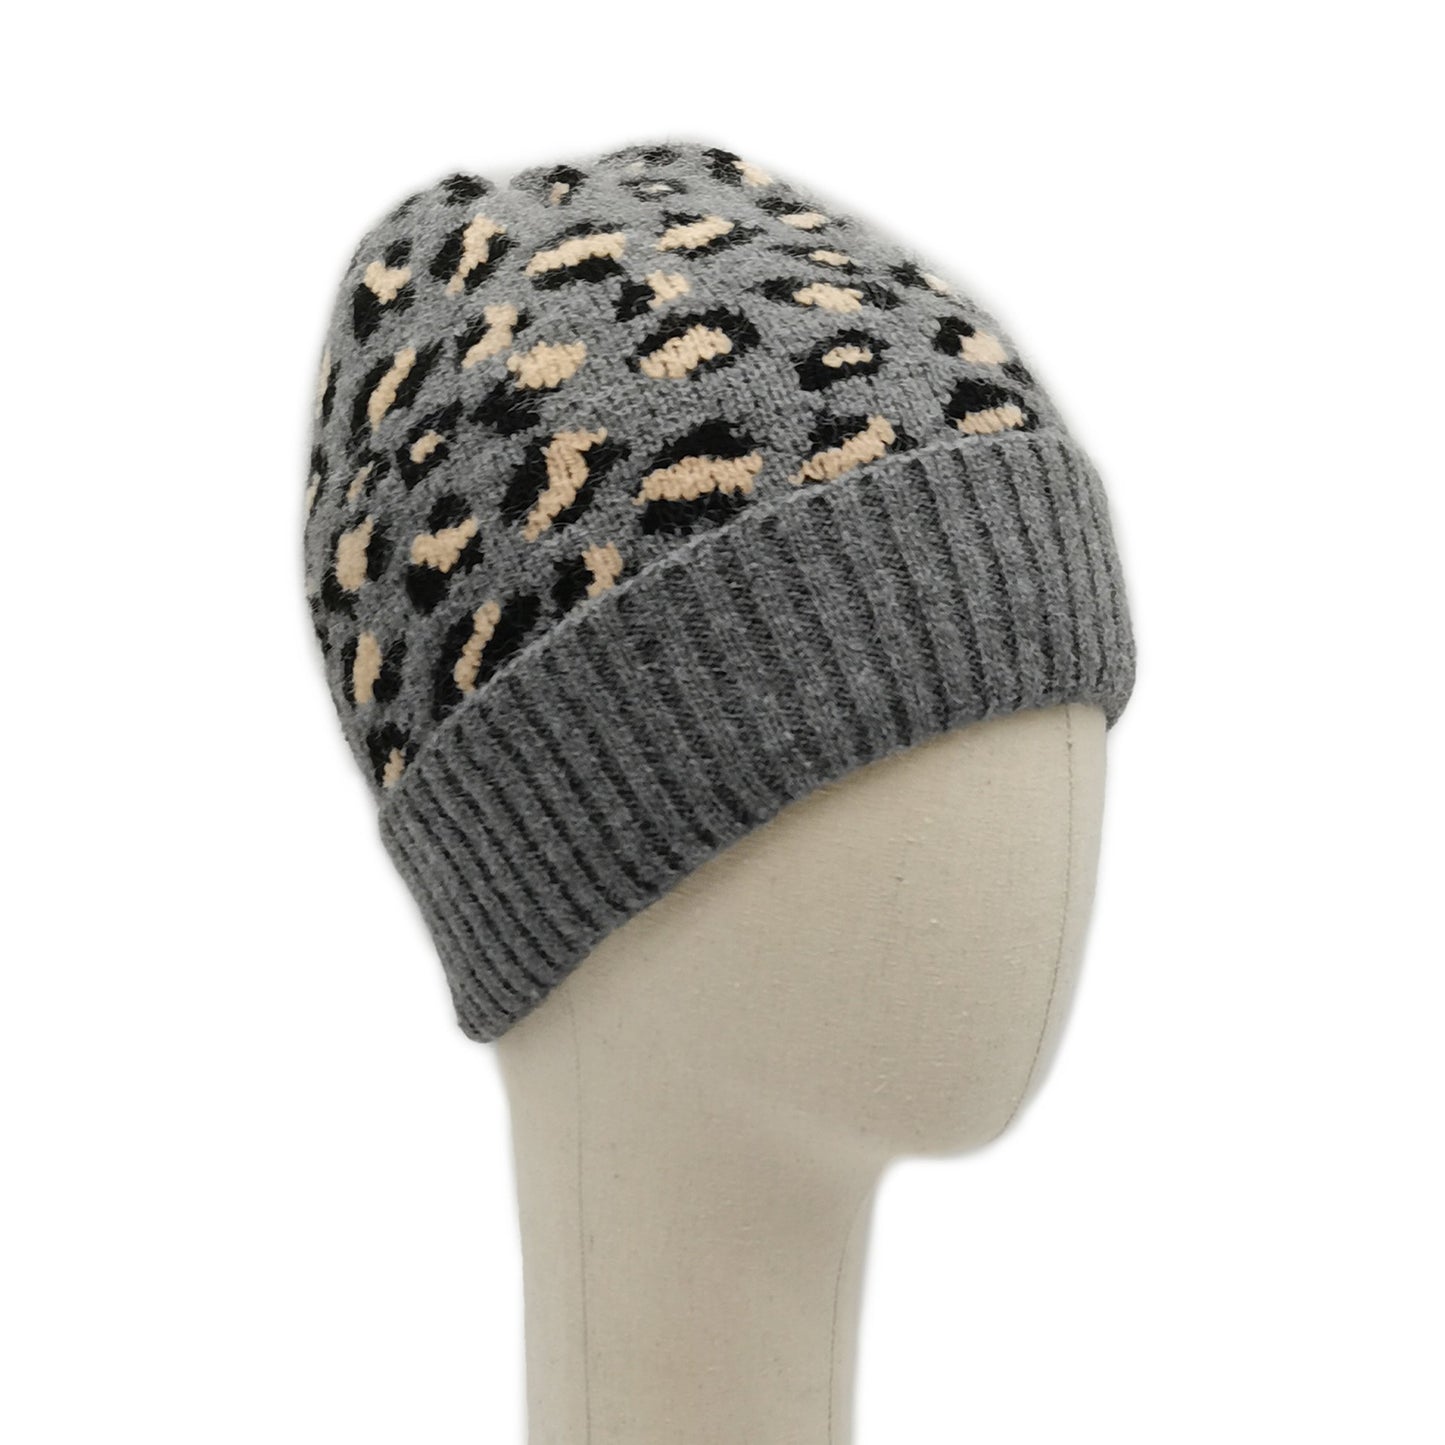 Empire Cove Winter Set Knit Ribbed Leopard Cuff Beanie and Touch Screen Gloves Gift Set